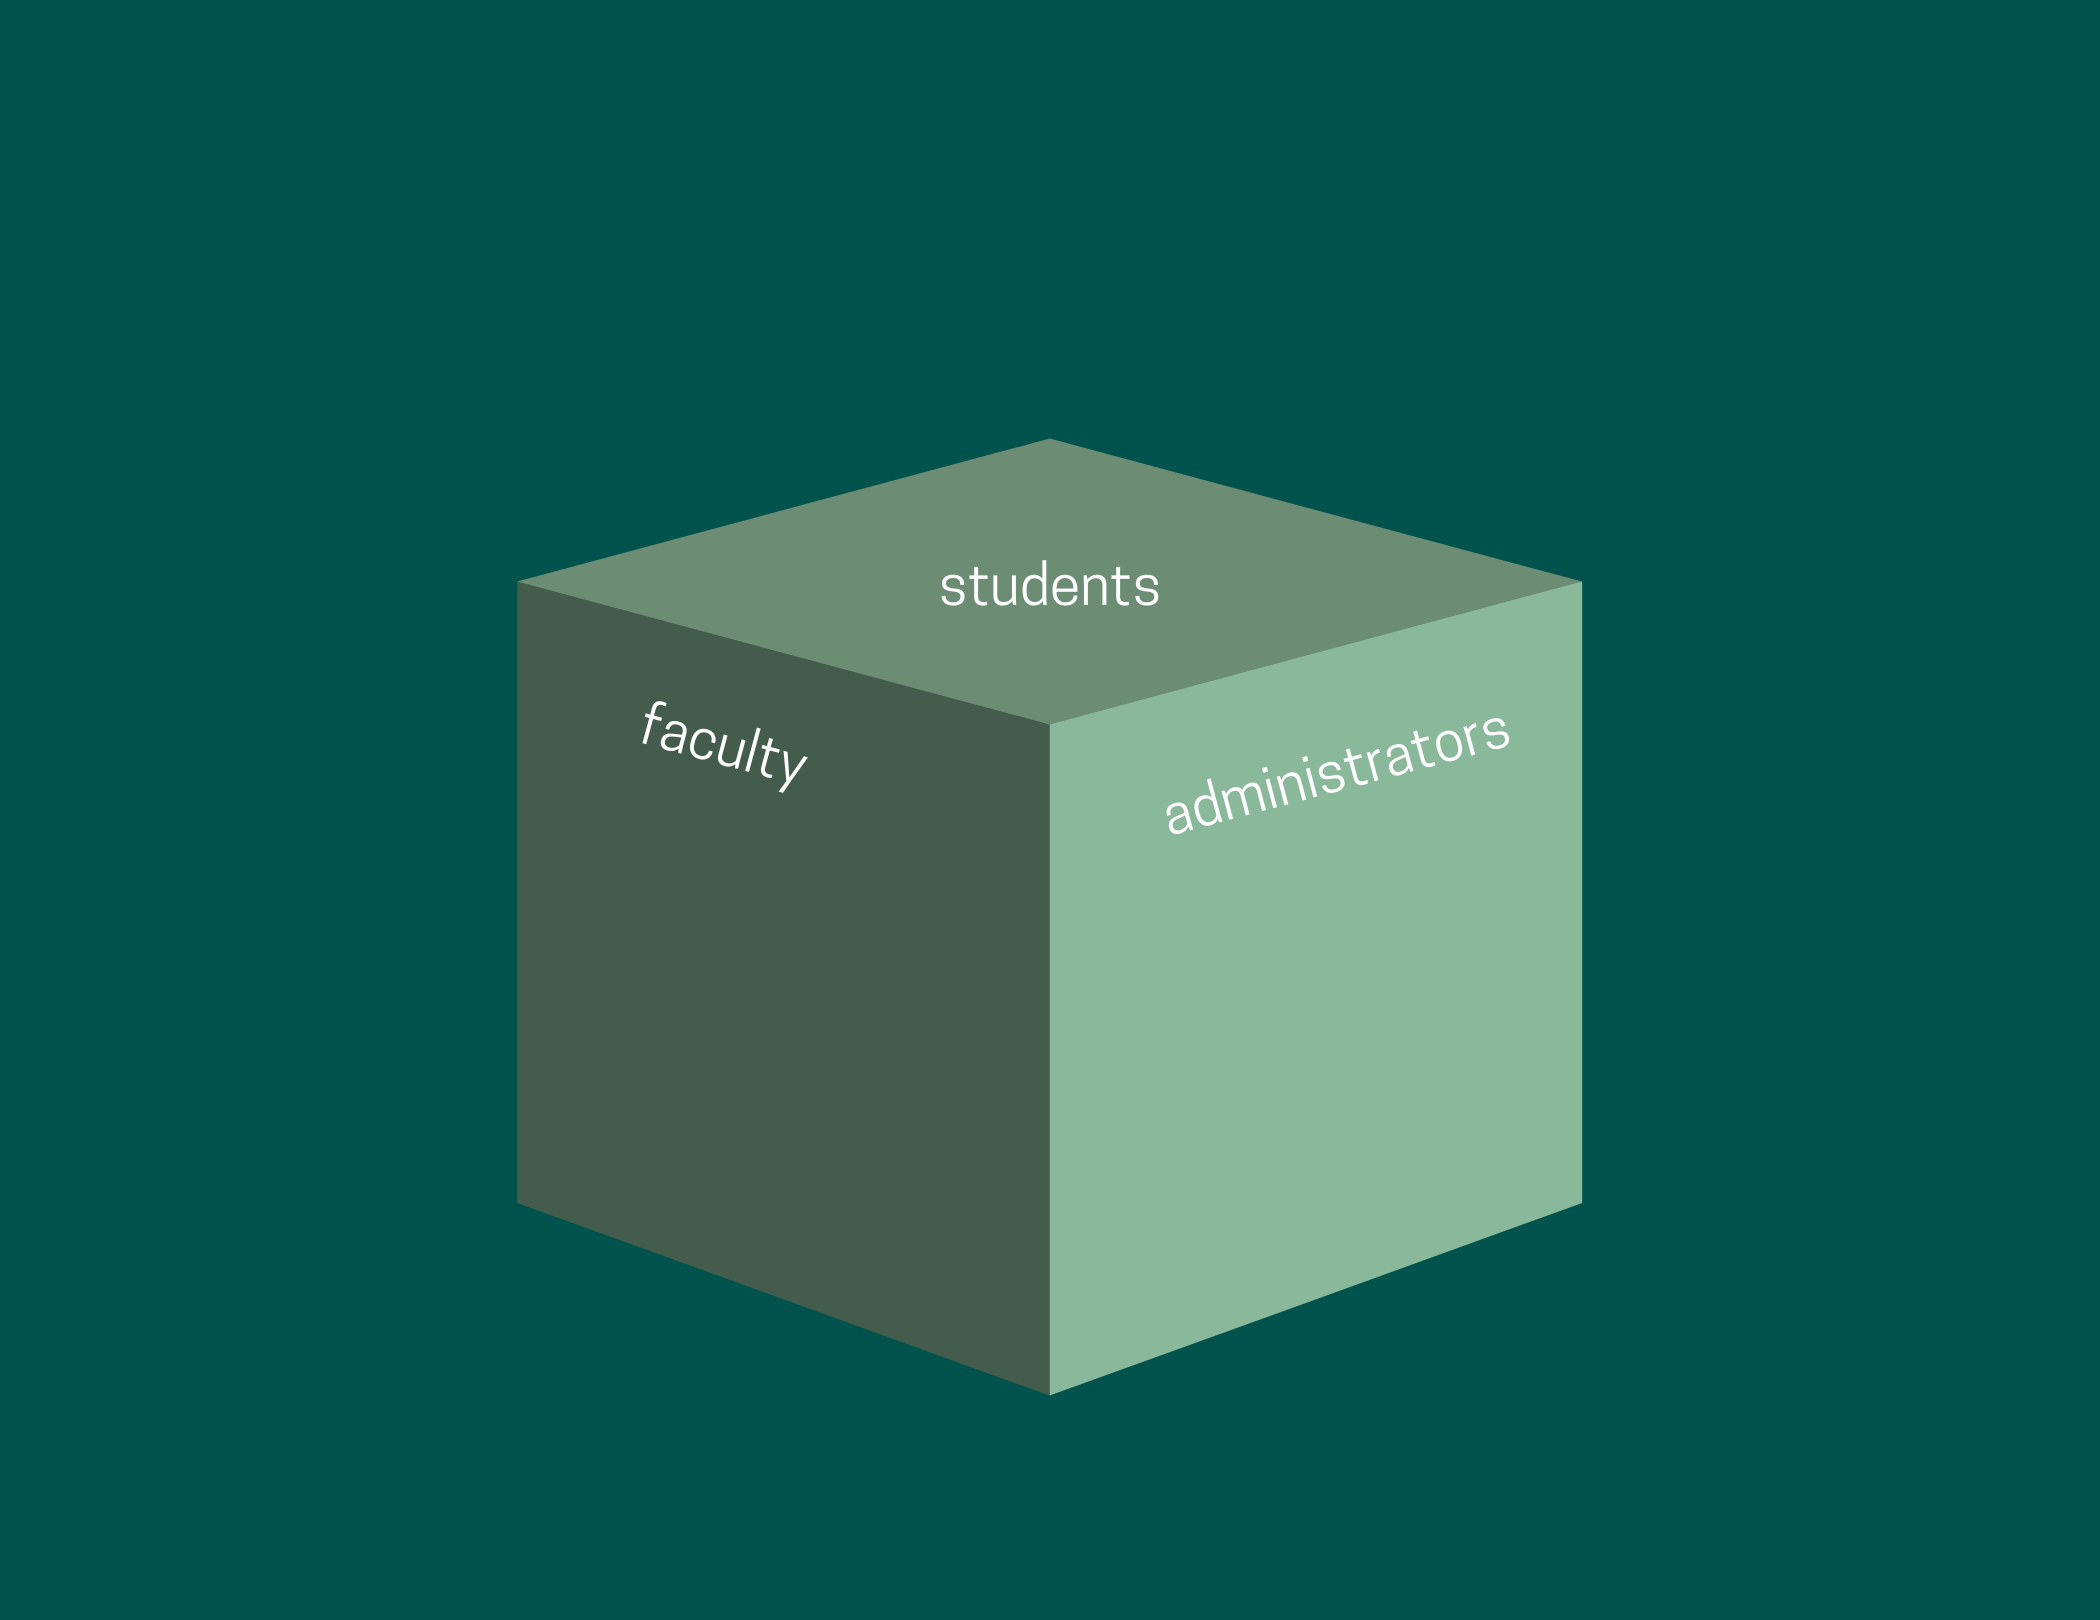 A cube is centered on the page. Three different sides of the cube are visible, one with 'faculty,' one with 'administrators,' and one with 'students.' 